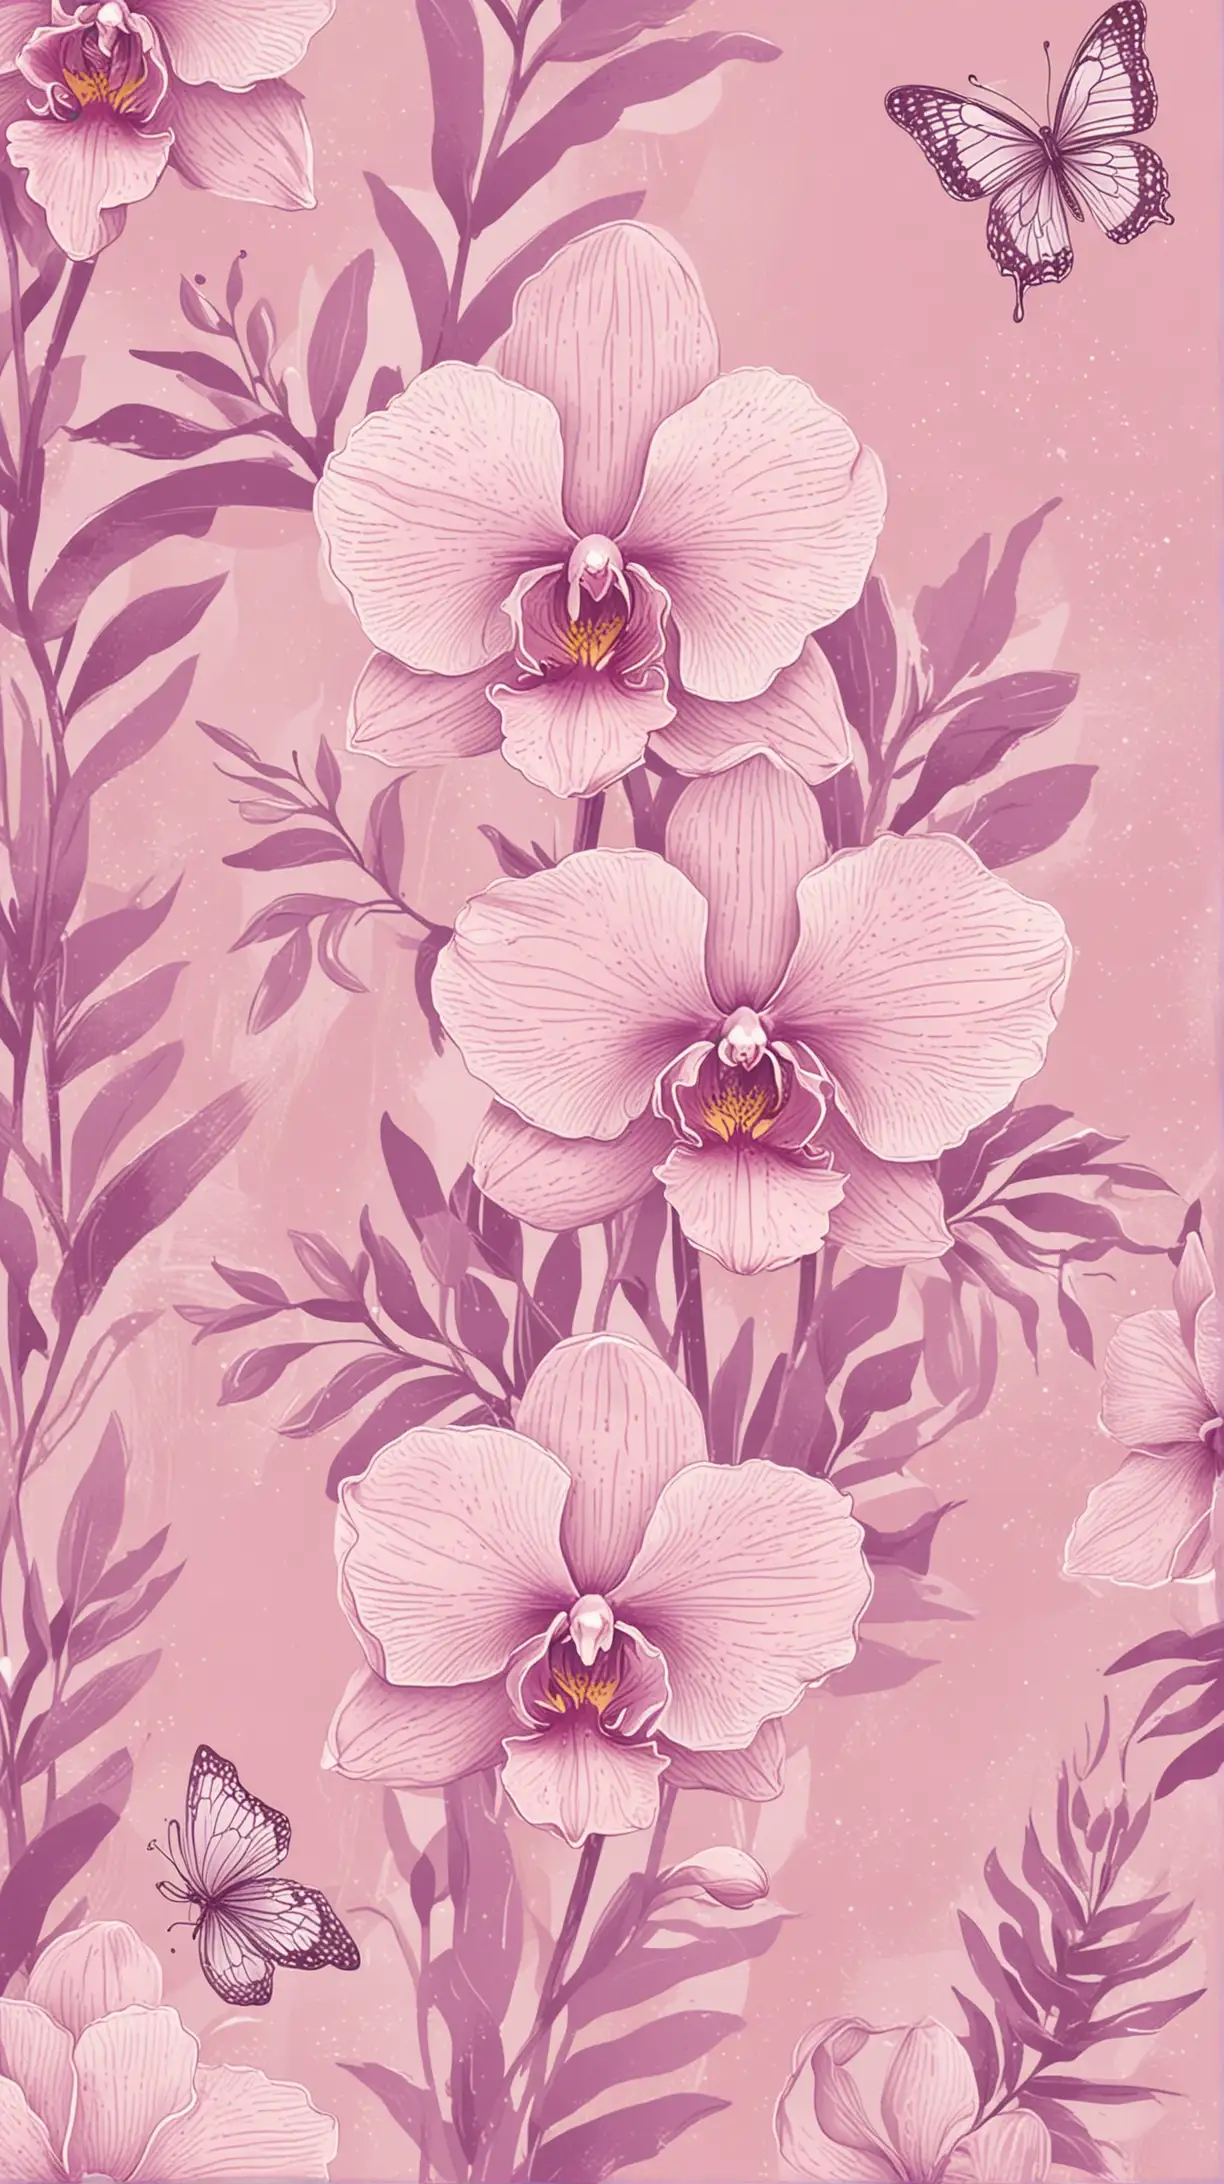 https://s.mj.run/vUKbLOTBGAQ A seamless pattern with a digital illustration of orchid, butterfly and leaves in pastel purple hues, their forms intertwined on an isolated pink background. The design incorporates the soft pinks and purples of lilac, creating a dreamy atmosphere that evokes tranquility and nature's beauty. Digital art meets vector printmaking, focusing on clean lines and geometric shapes for visual harmony. Soft lighting enhances the serene mood of the composition. T-shirt design graphic, vector contour in the style of minimal editing. --ar 59:88 --stylize 750 --iw 2